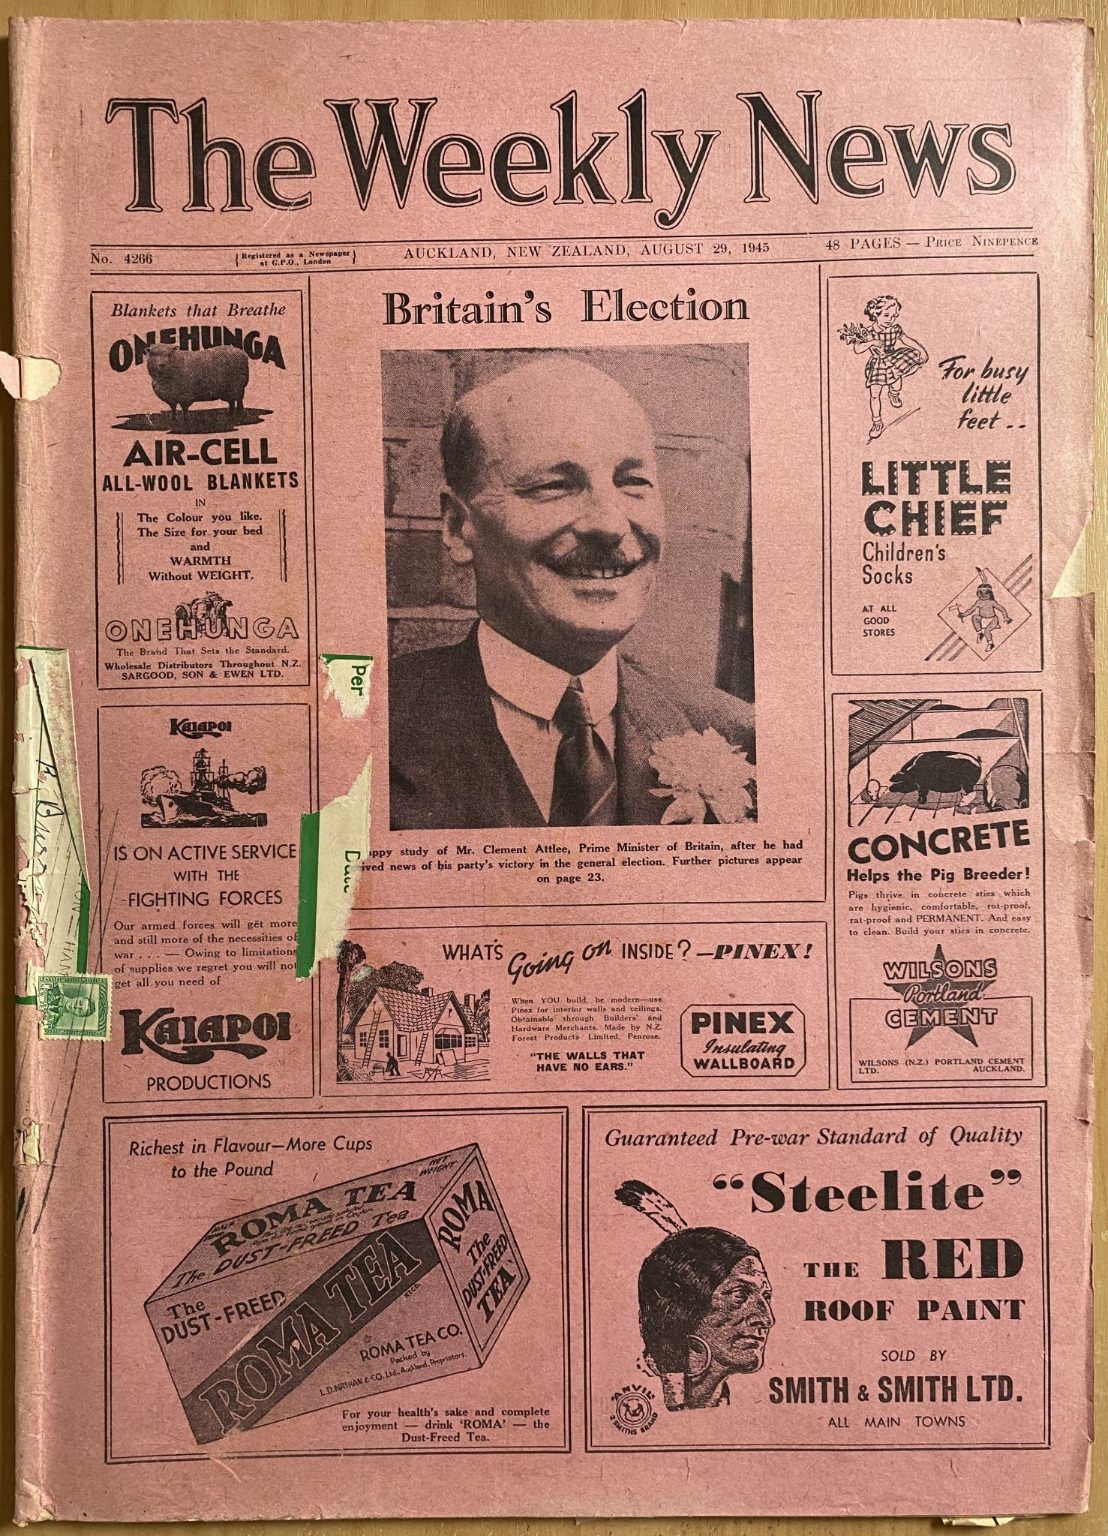 OLD NEWSPAPER: The Weekly News - No. 4266, 29 August 1945